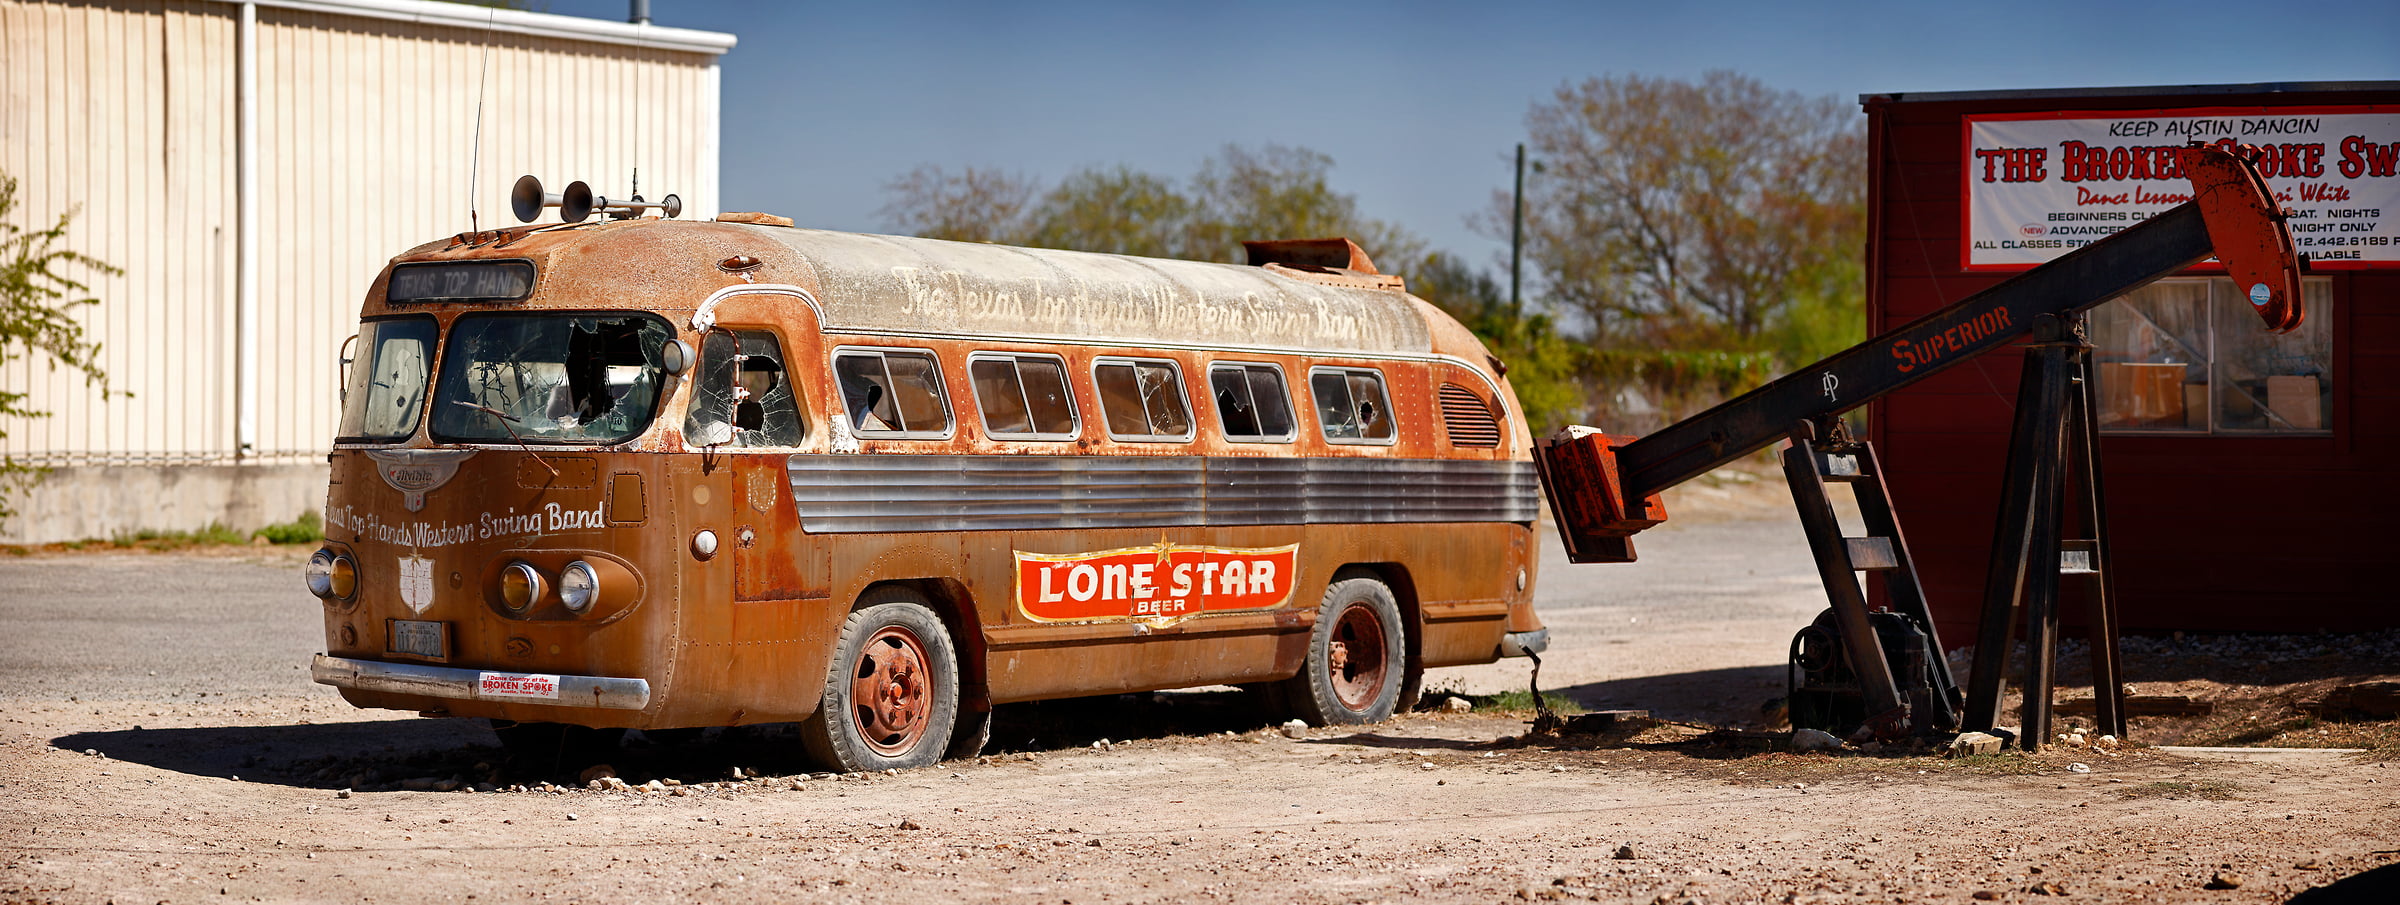 364 megapixels! A very high resolution fine art photograph of an old iconic bus that is emblamatic of Texas culture; VAST photo created by Phil Crawshay in Texas.